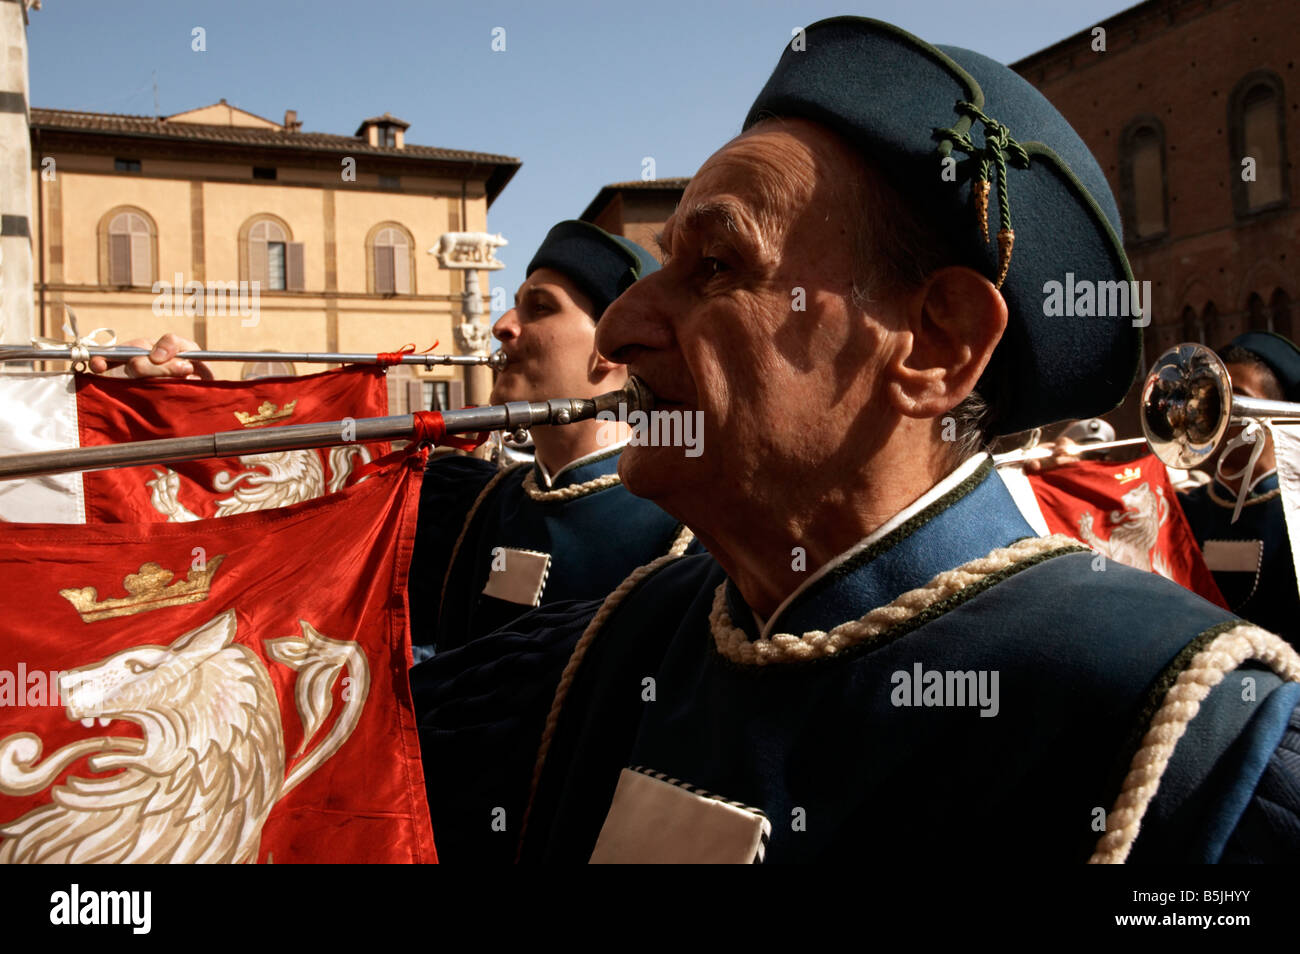 Musicians during the Votiva street procession, The Palio, Siena, Italy Stock Photo